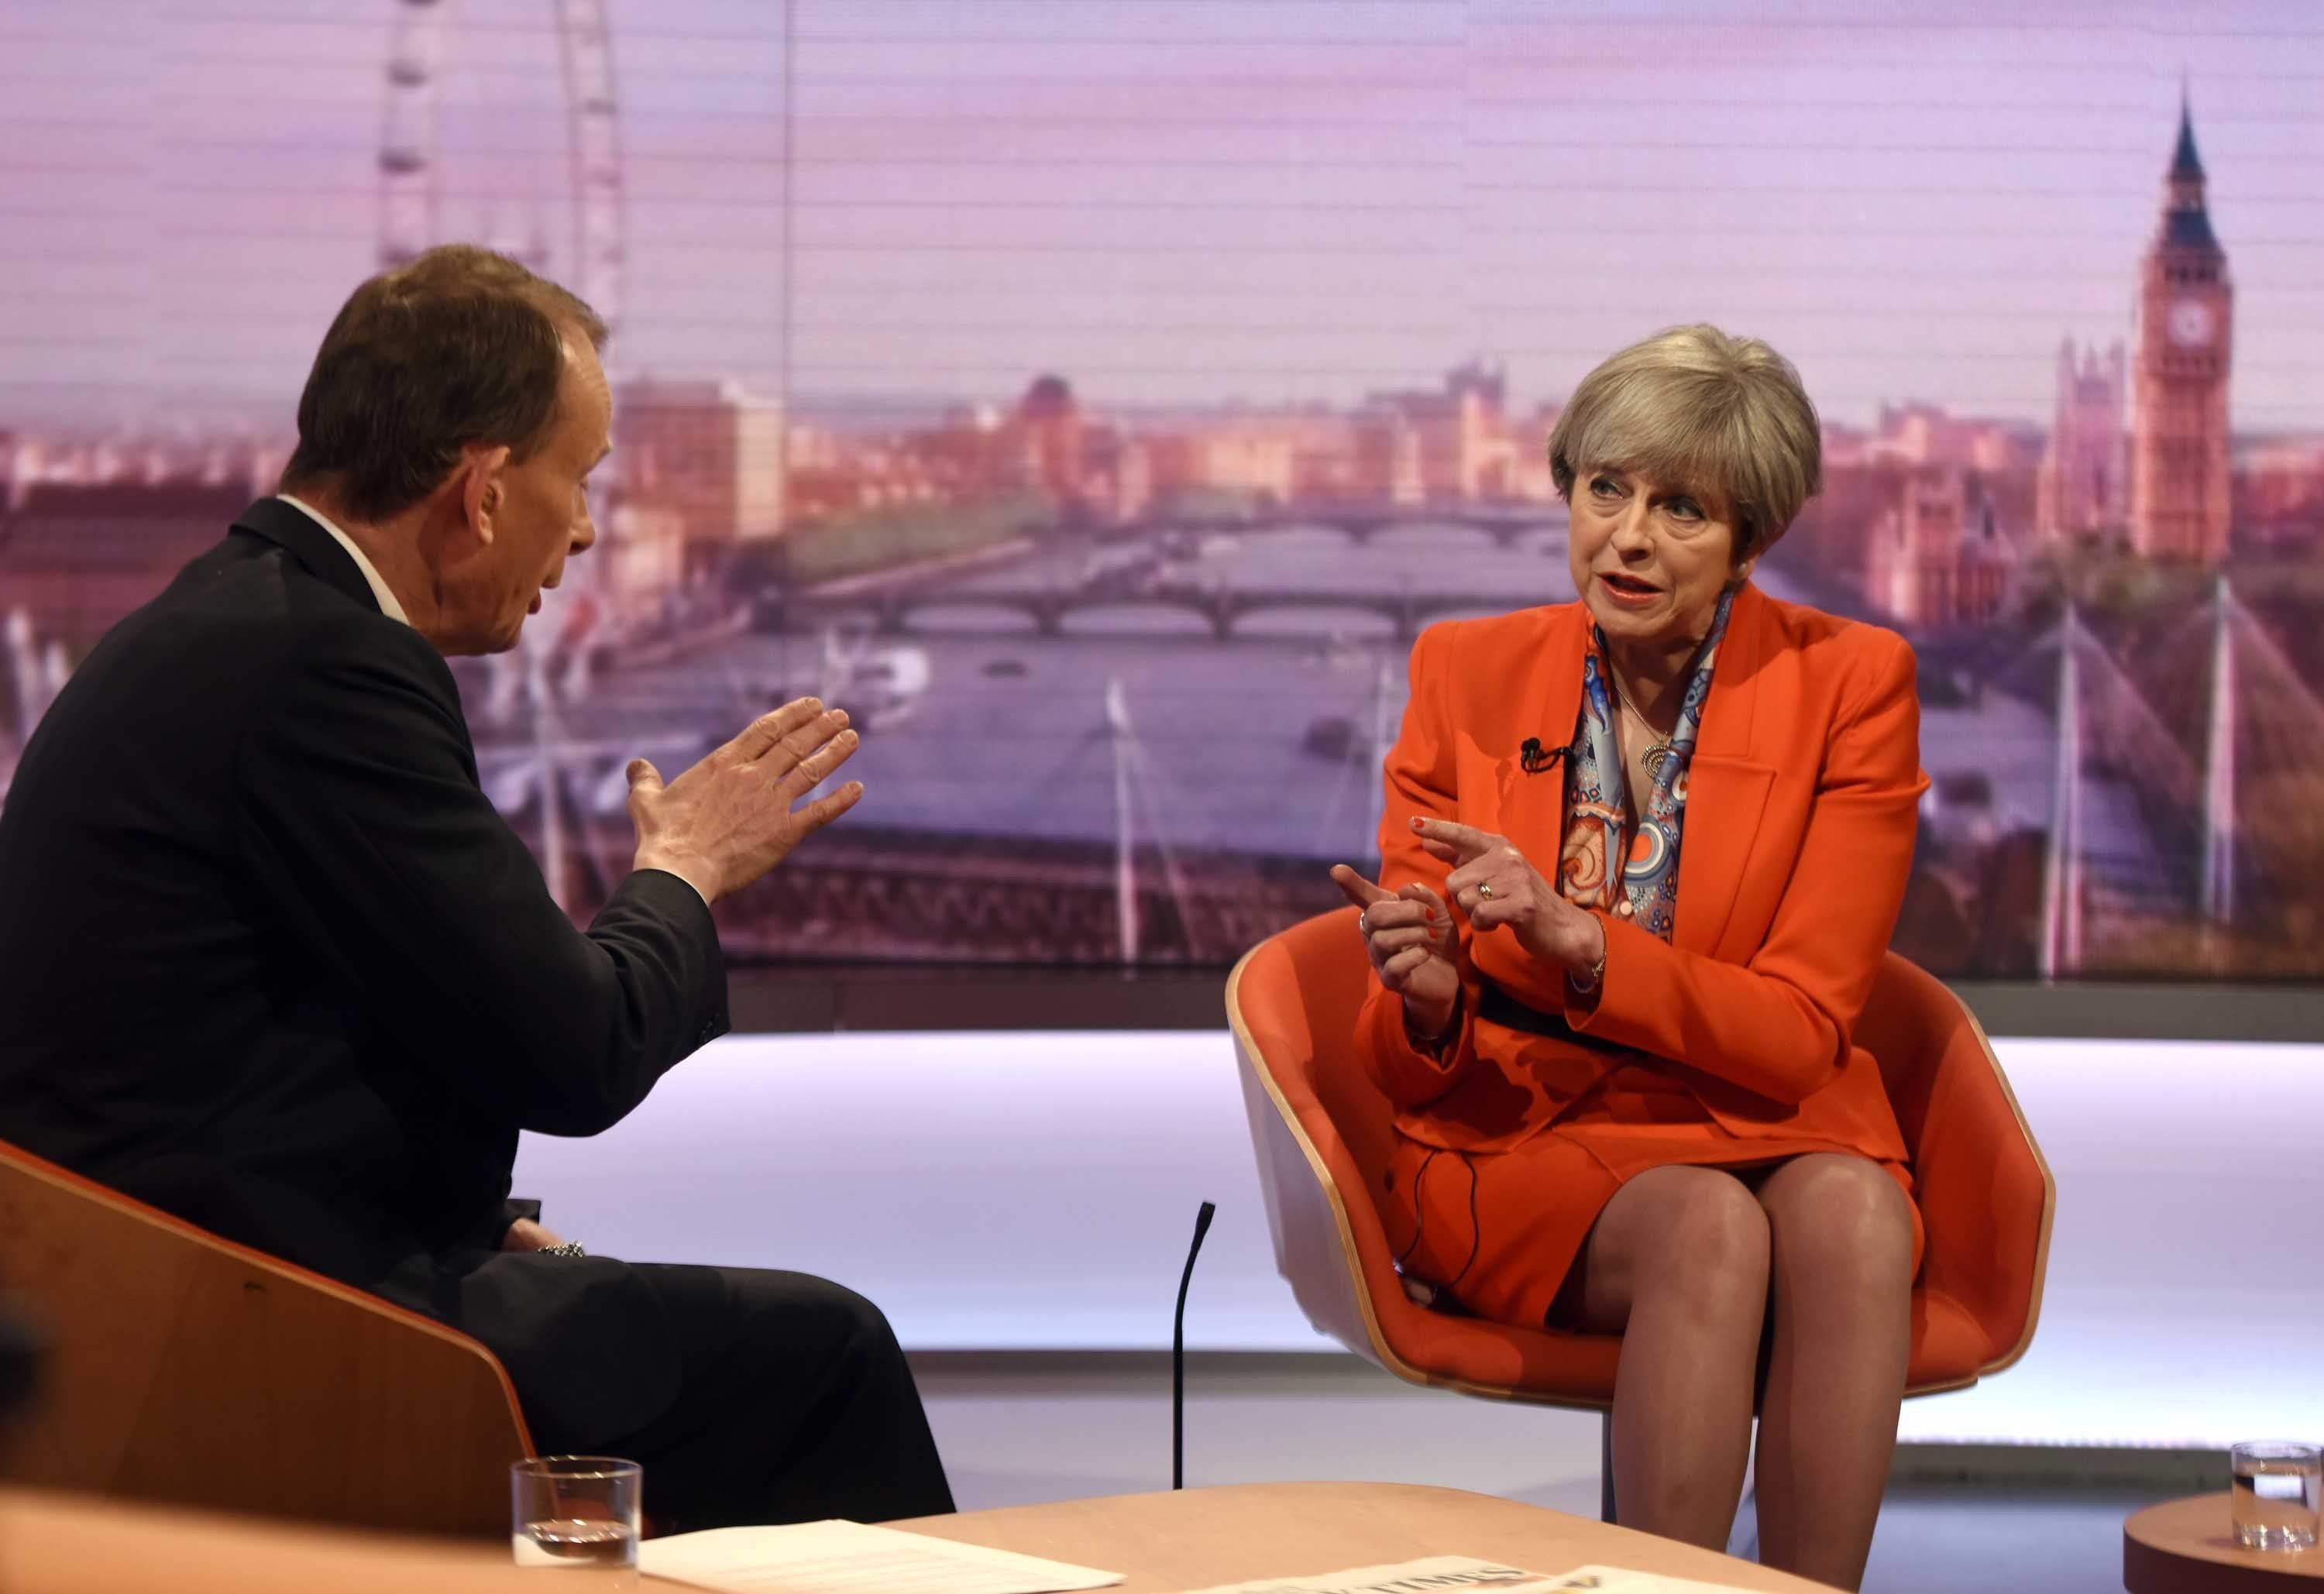 Andrew Marr and Prime Minister Theresa May appearing on the BBC One current affairs programme, The Andrew Marr Show.